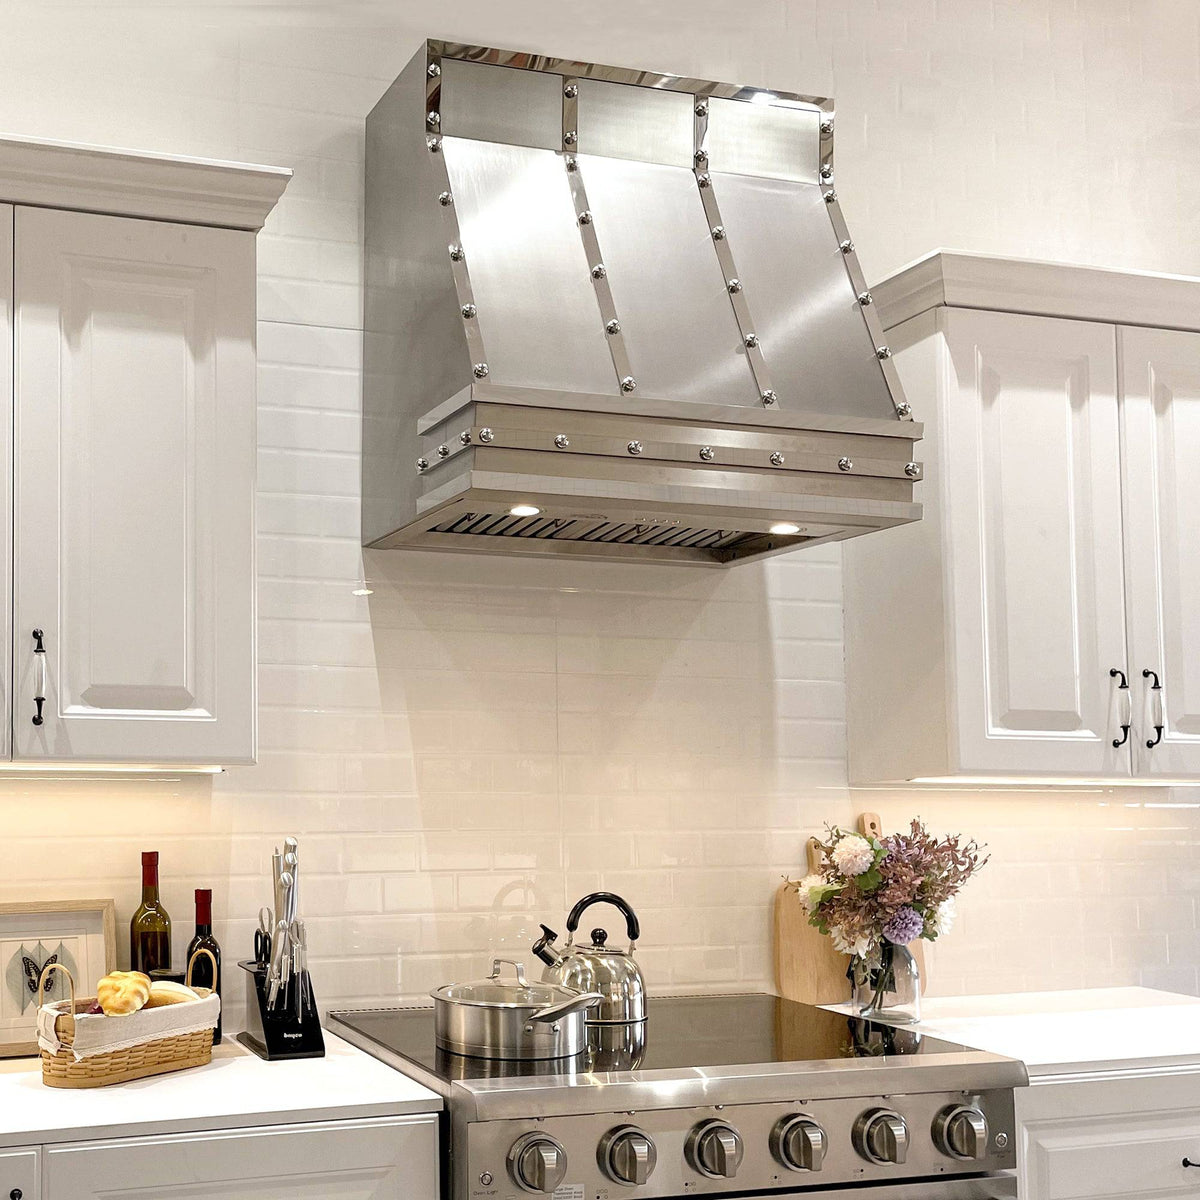 Fobest Under Cabinet Custom Stainless Steel Vent Hood with Polished Straps FSS-13 - Stainless Steel Range Hood-Fobest Appliance